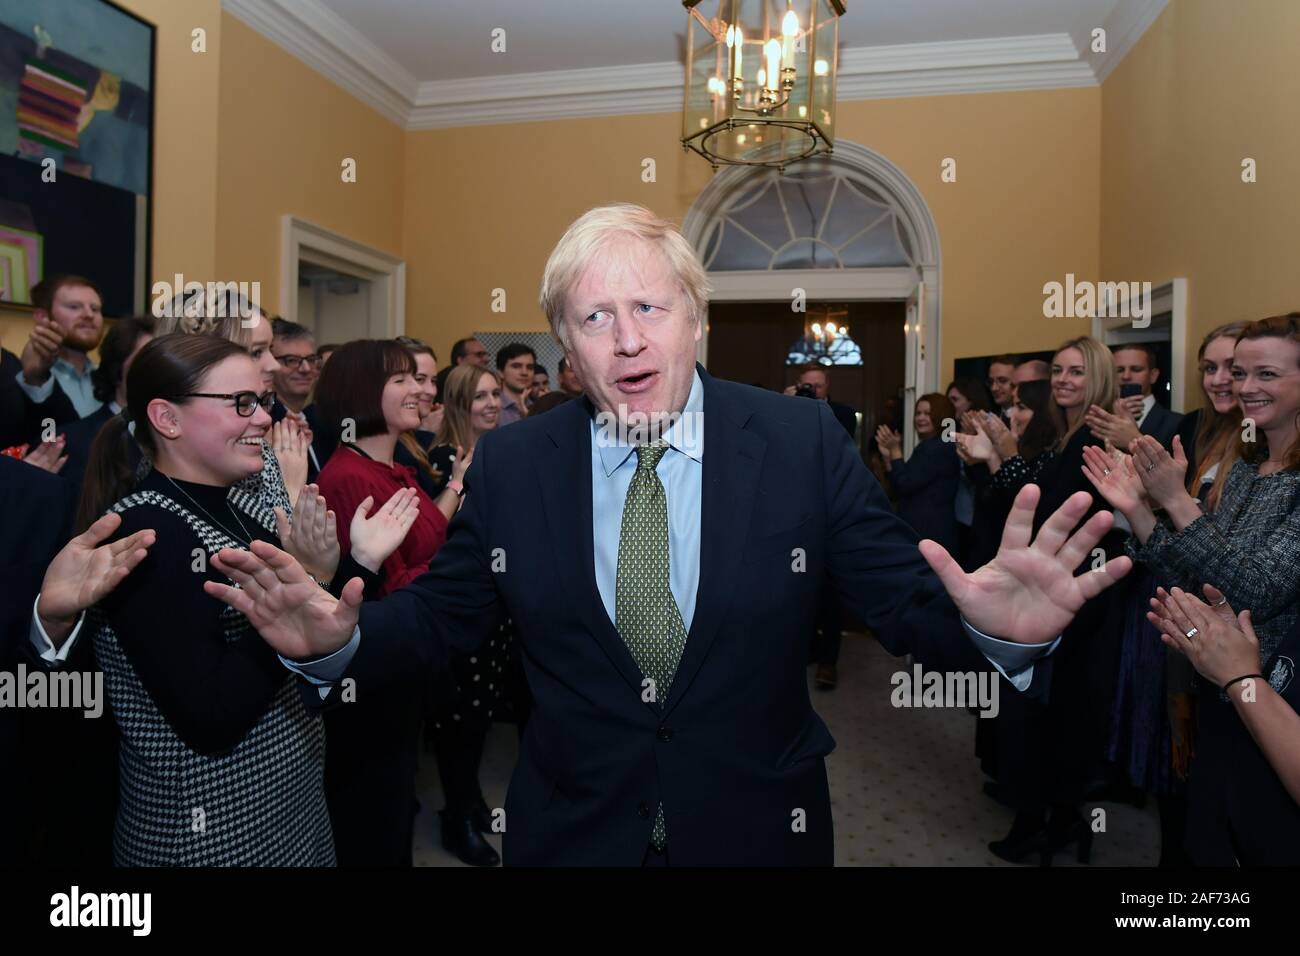 Prime Minister Boris Johnson is greeted by staff as he arrives back at 10 Downing Street, London, after meeting Queen Elizabeth II and accepting her invitation to form a new government after the Conservative Party was returned to power in the General Election with an increased majority. Stock Photo